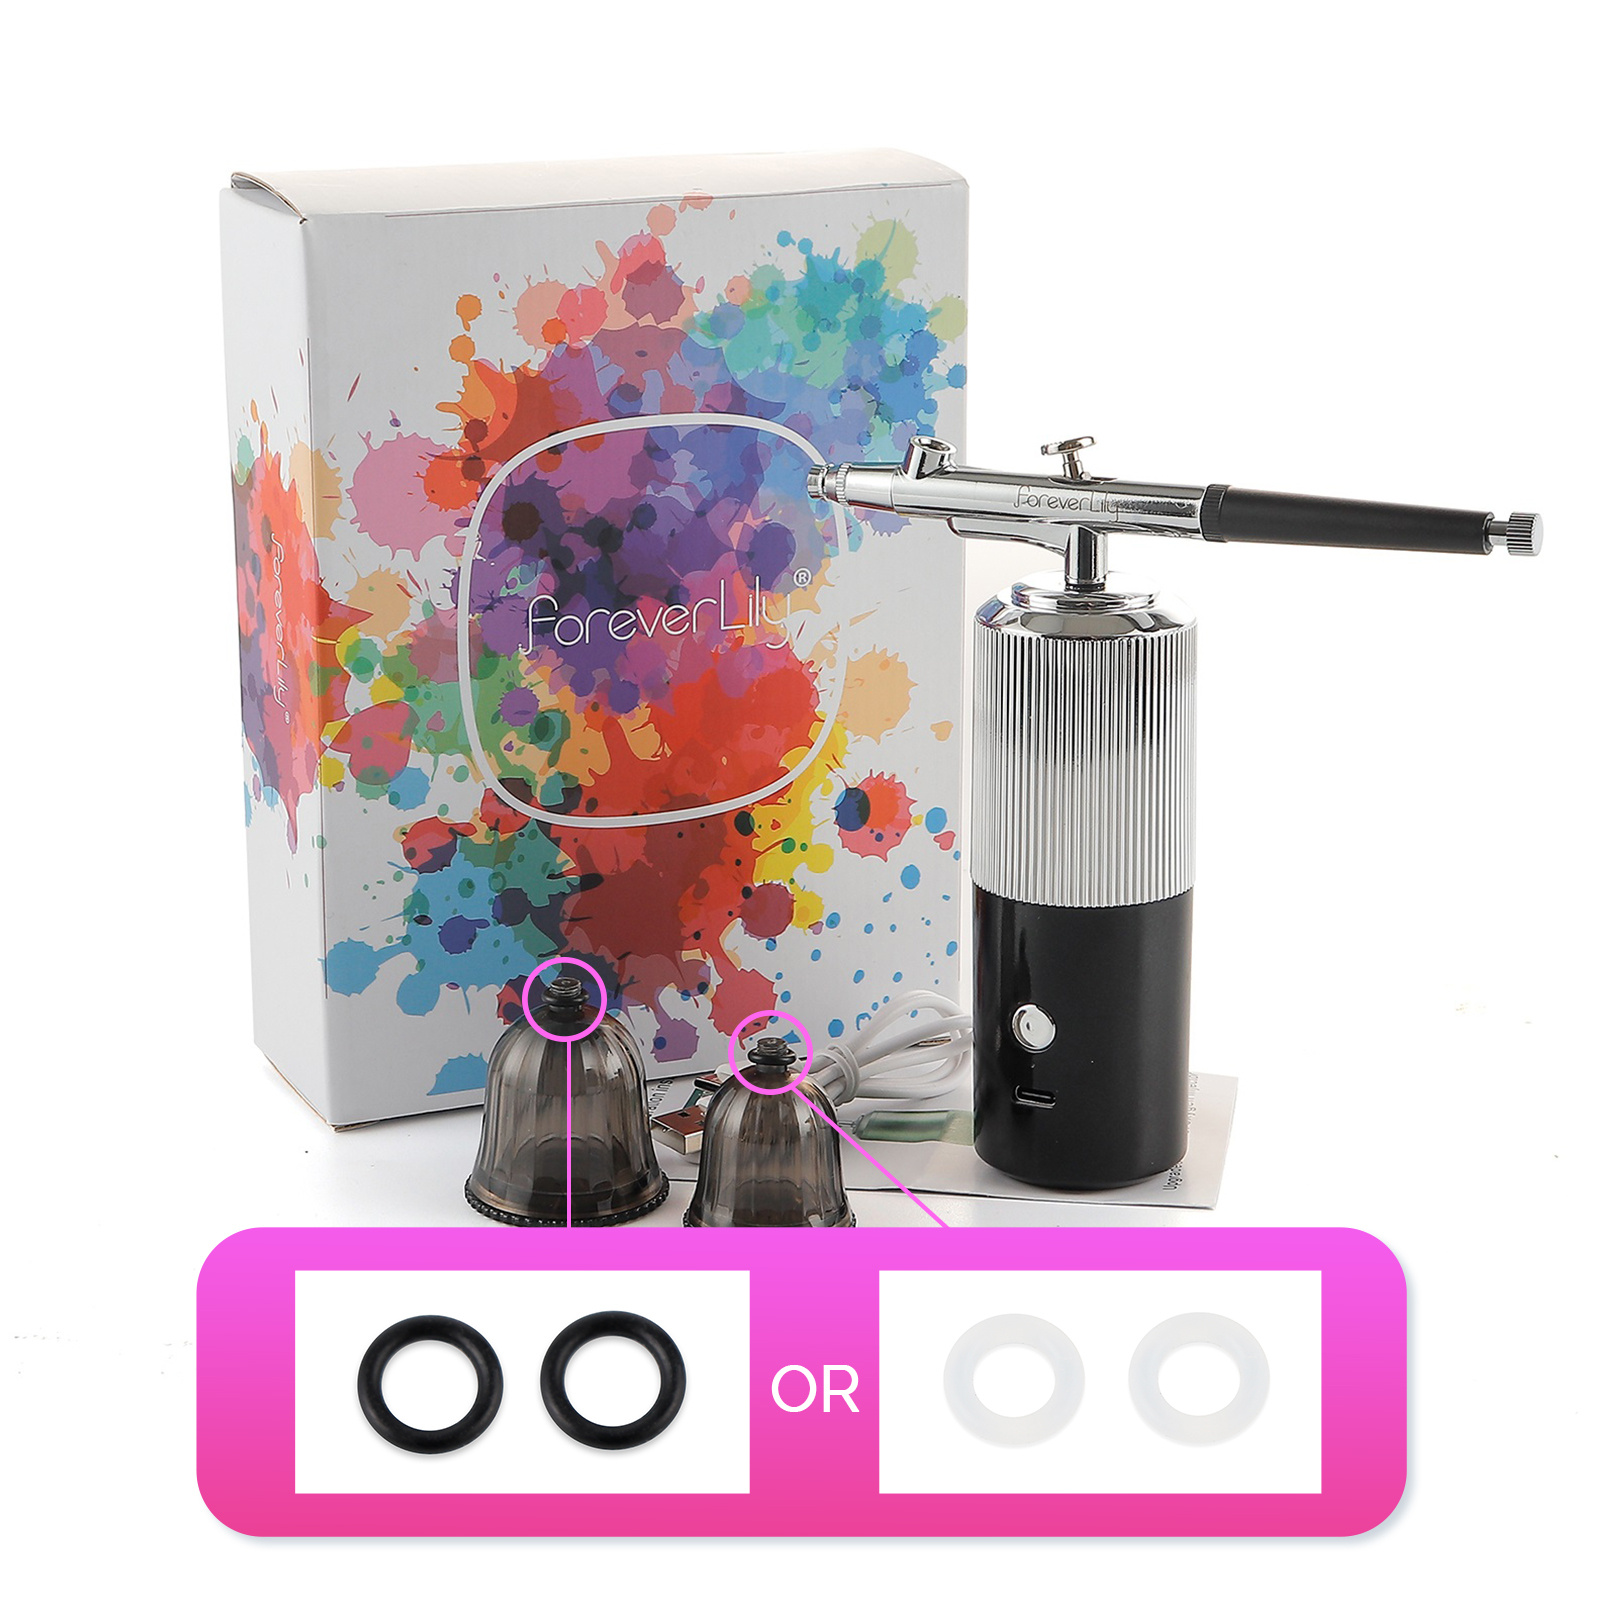 Dropship Oxygen Injector Mini Air Compressor Kit Air-Brush Paint Spray Gun  Airbrush For Nail Art Tattoo Craft Cake Nano Fog Mist Sprayer to Sell  Online at a Lower Price